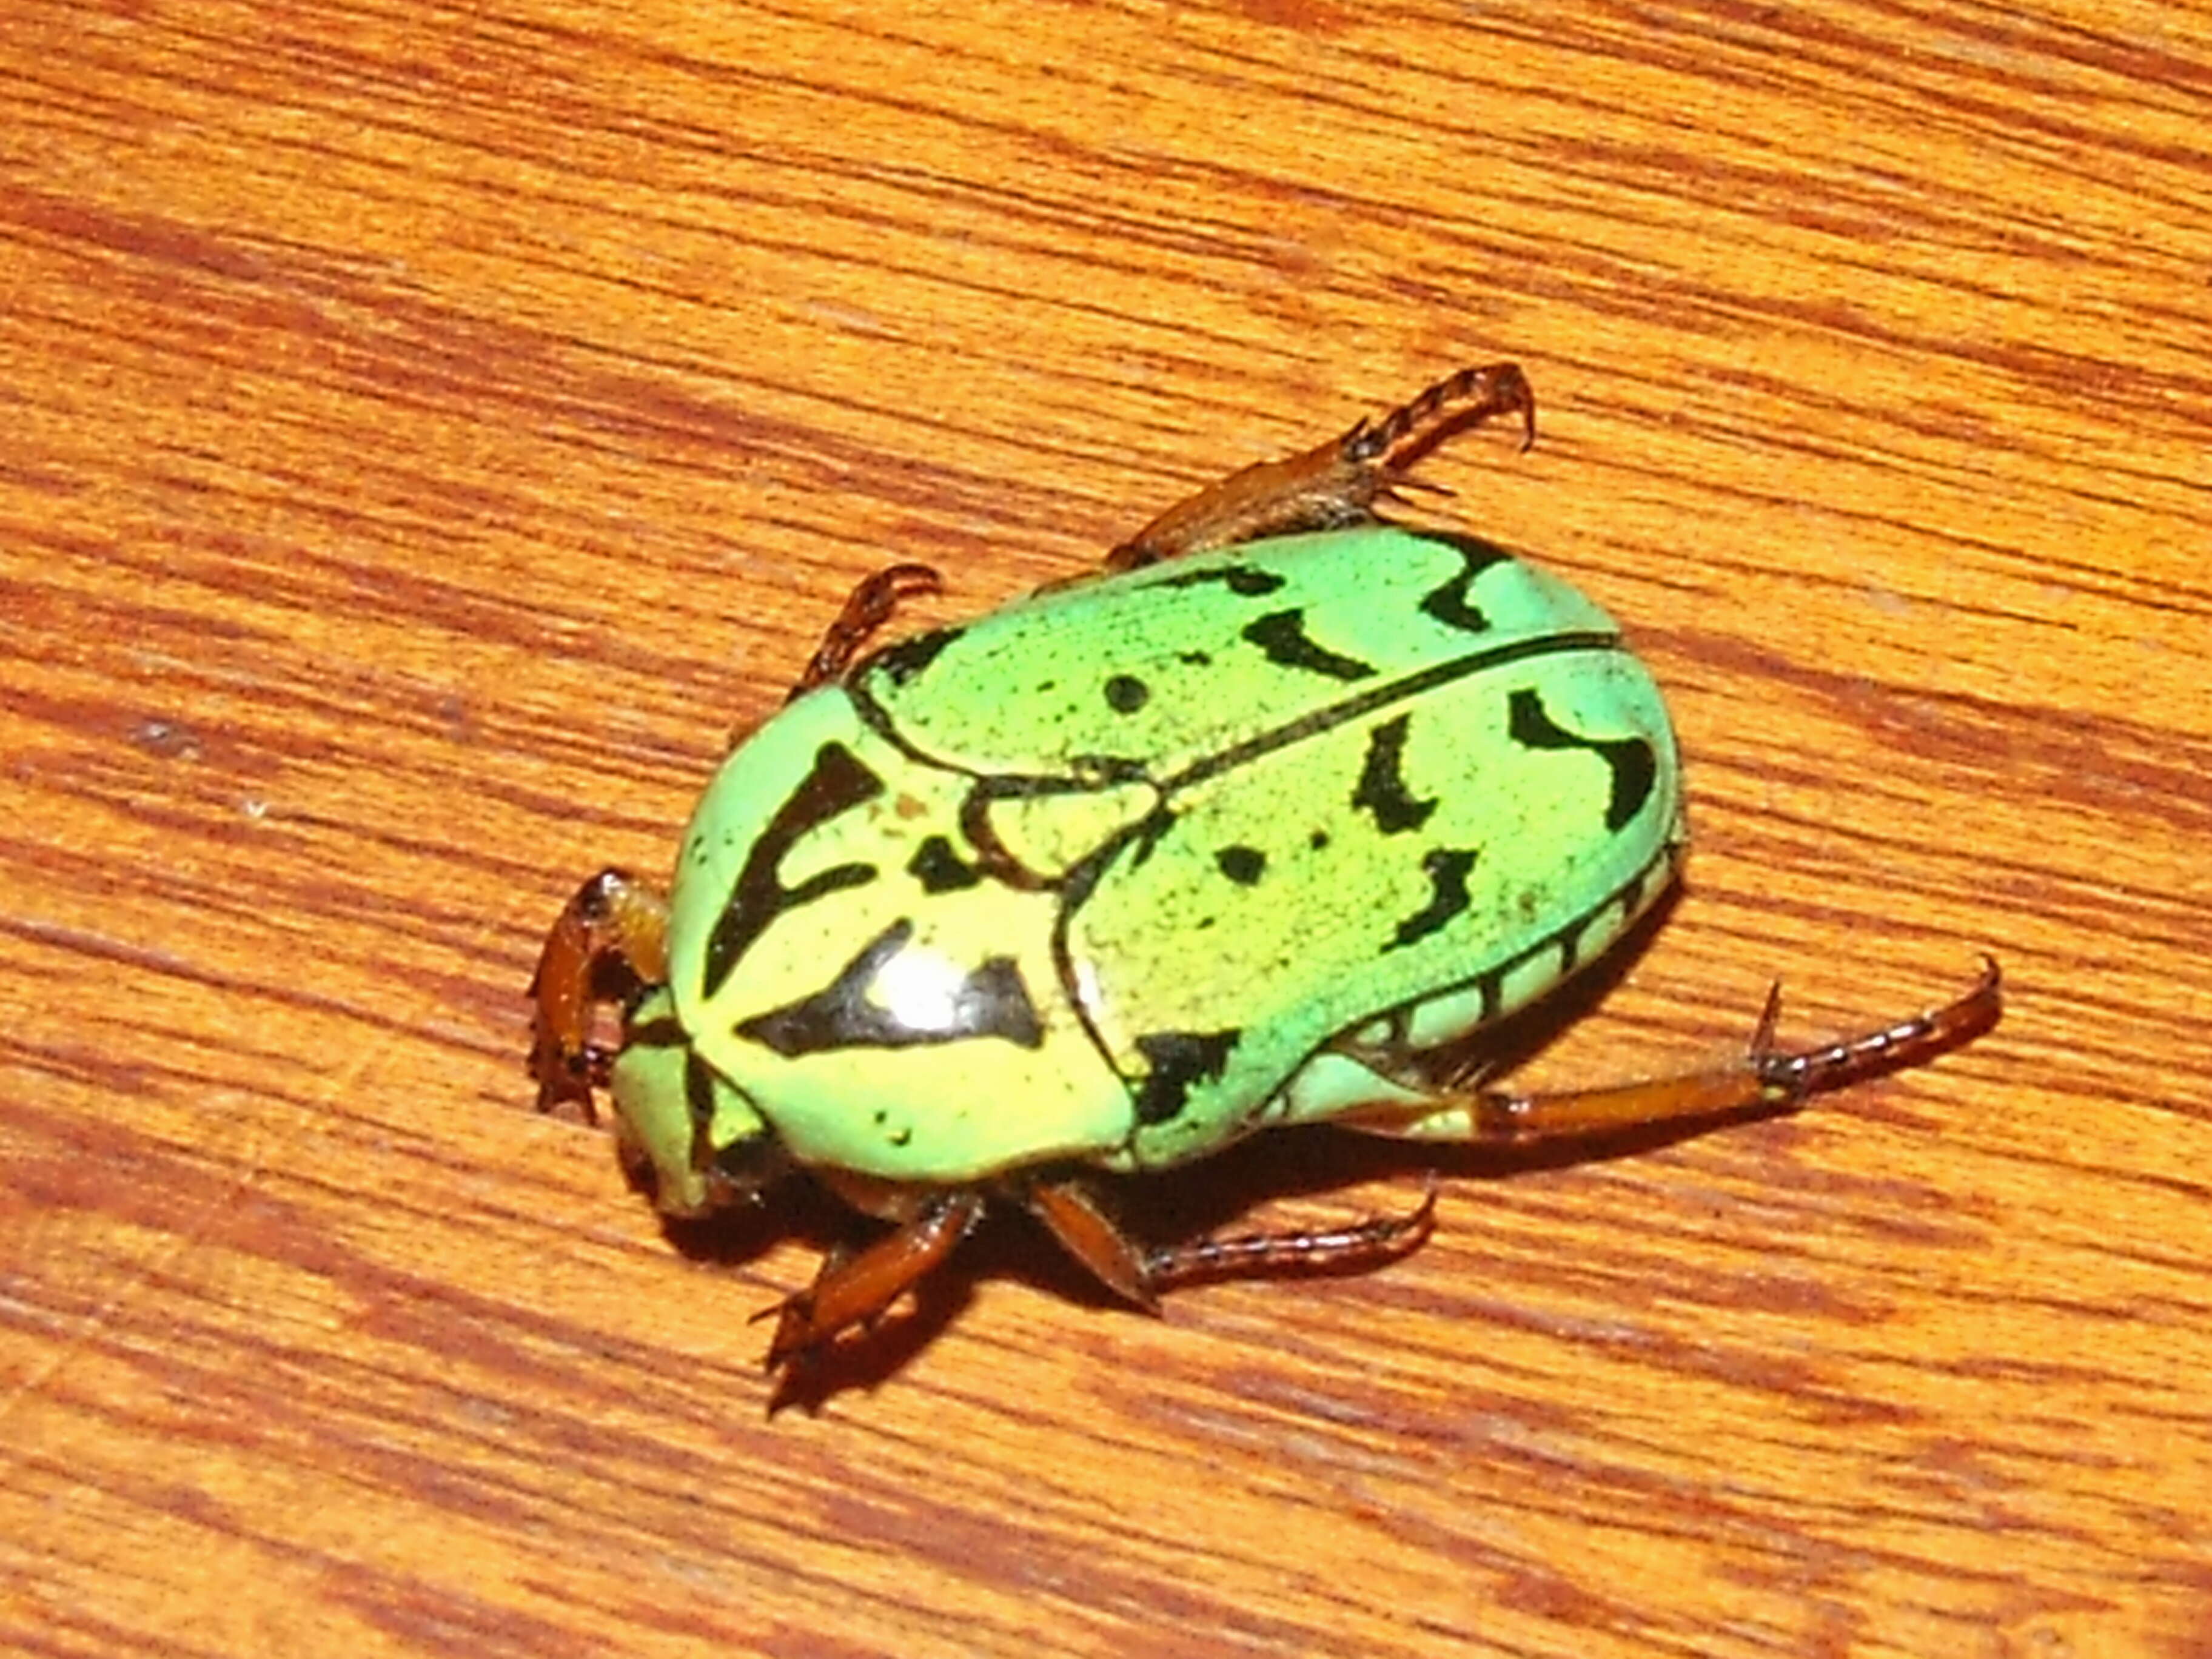 Image of flower chafers (beetles)